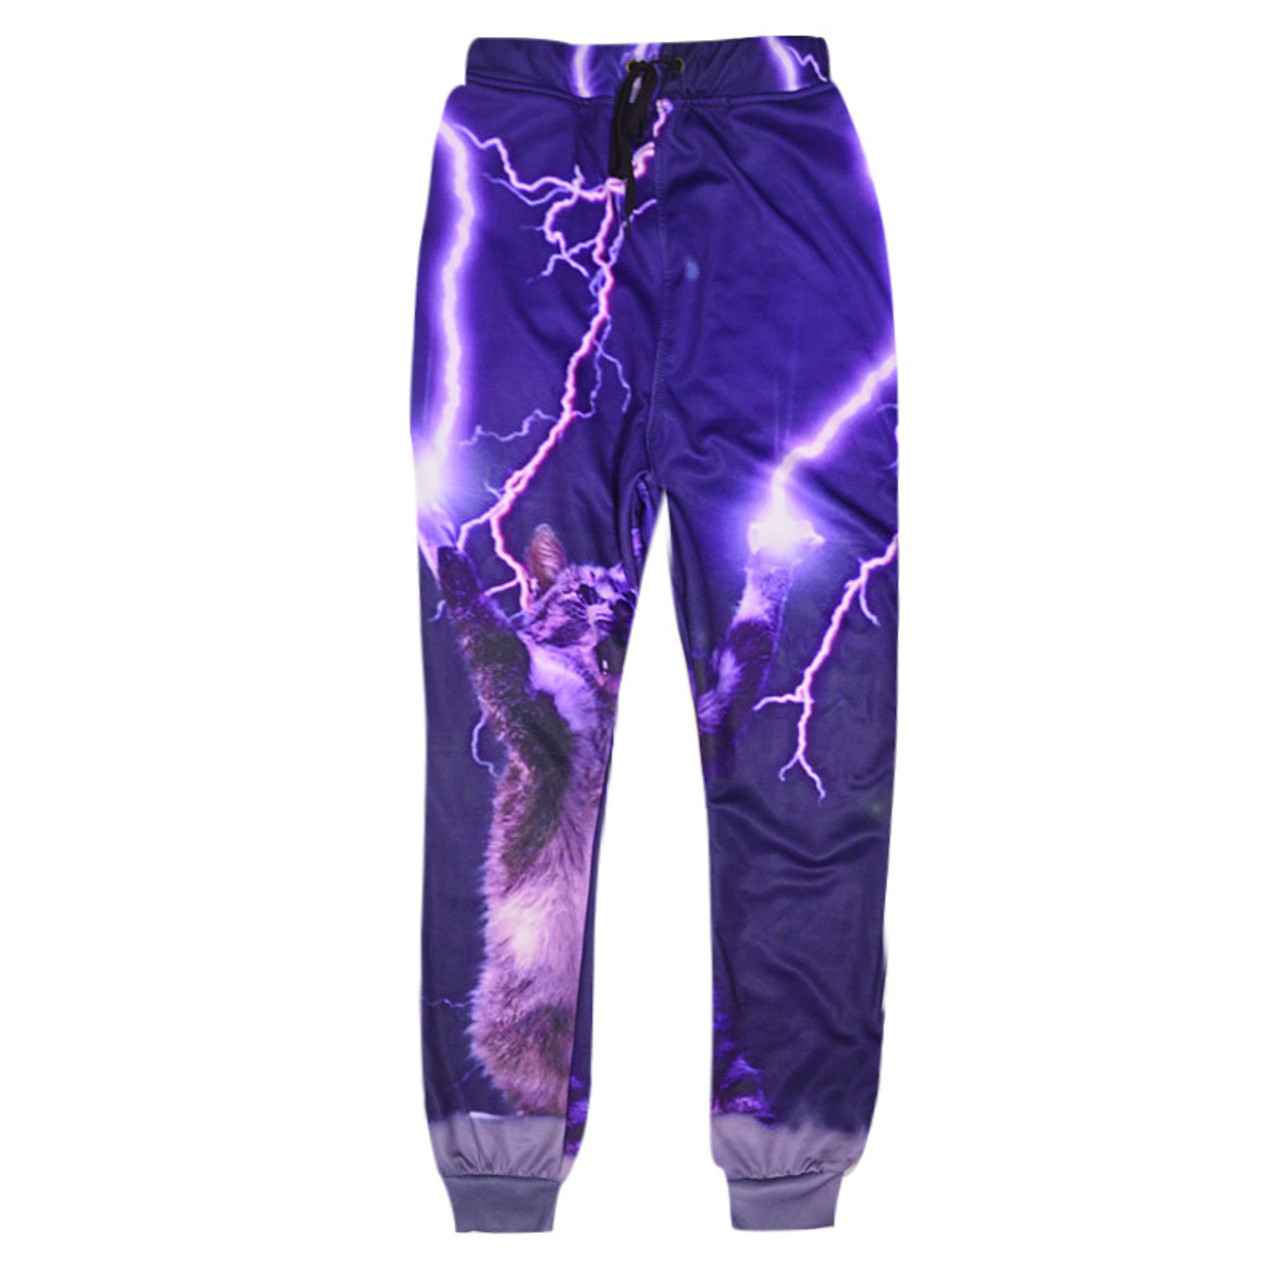 cneWID Unisex 3D Digital Print Sports Jogger Pants Casual Graphic Trousers Sweatpants with Drawstring 